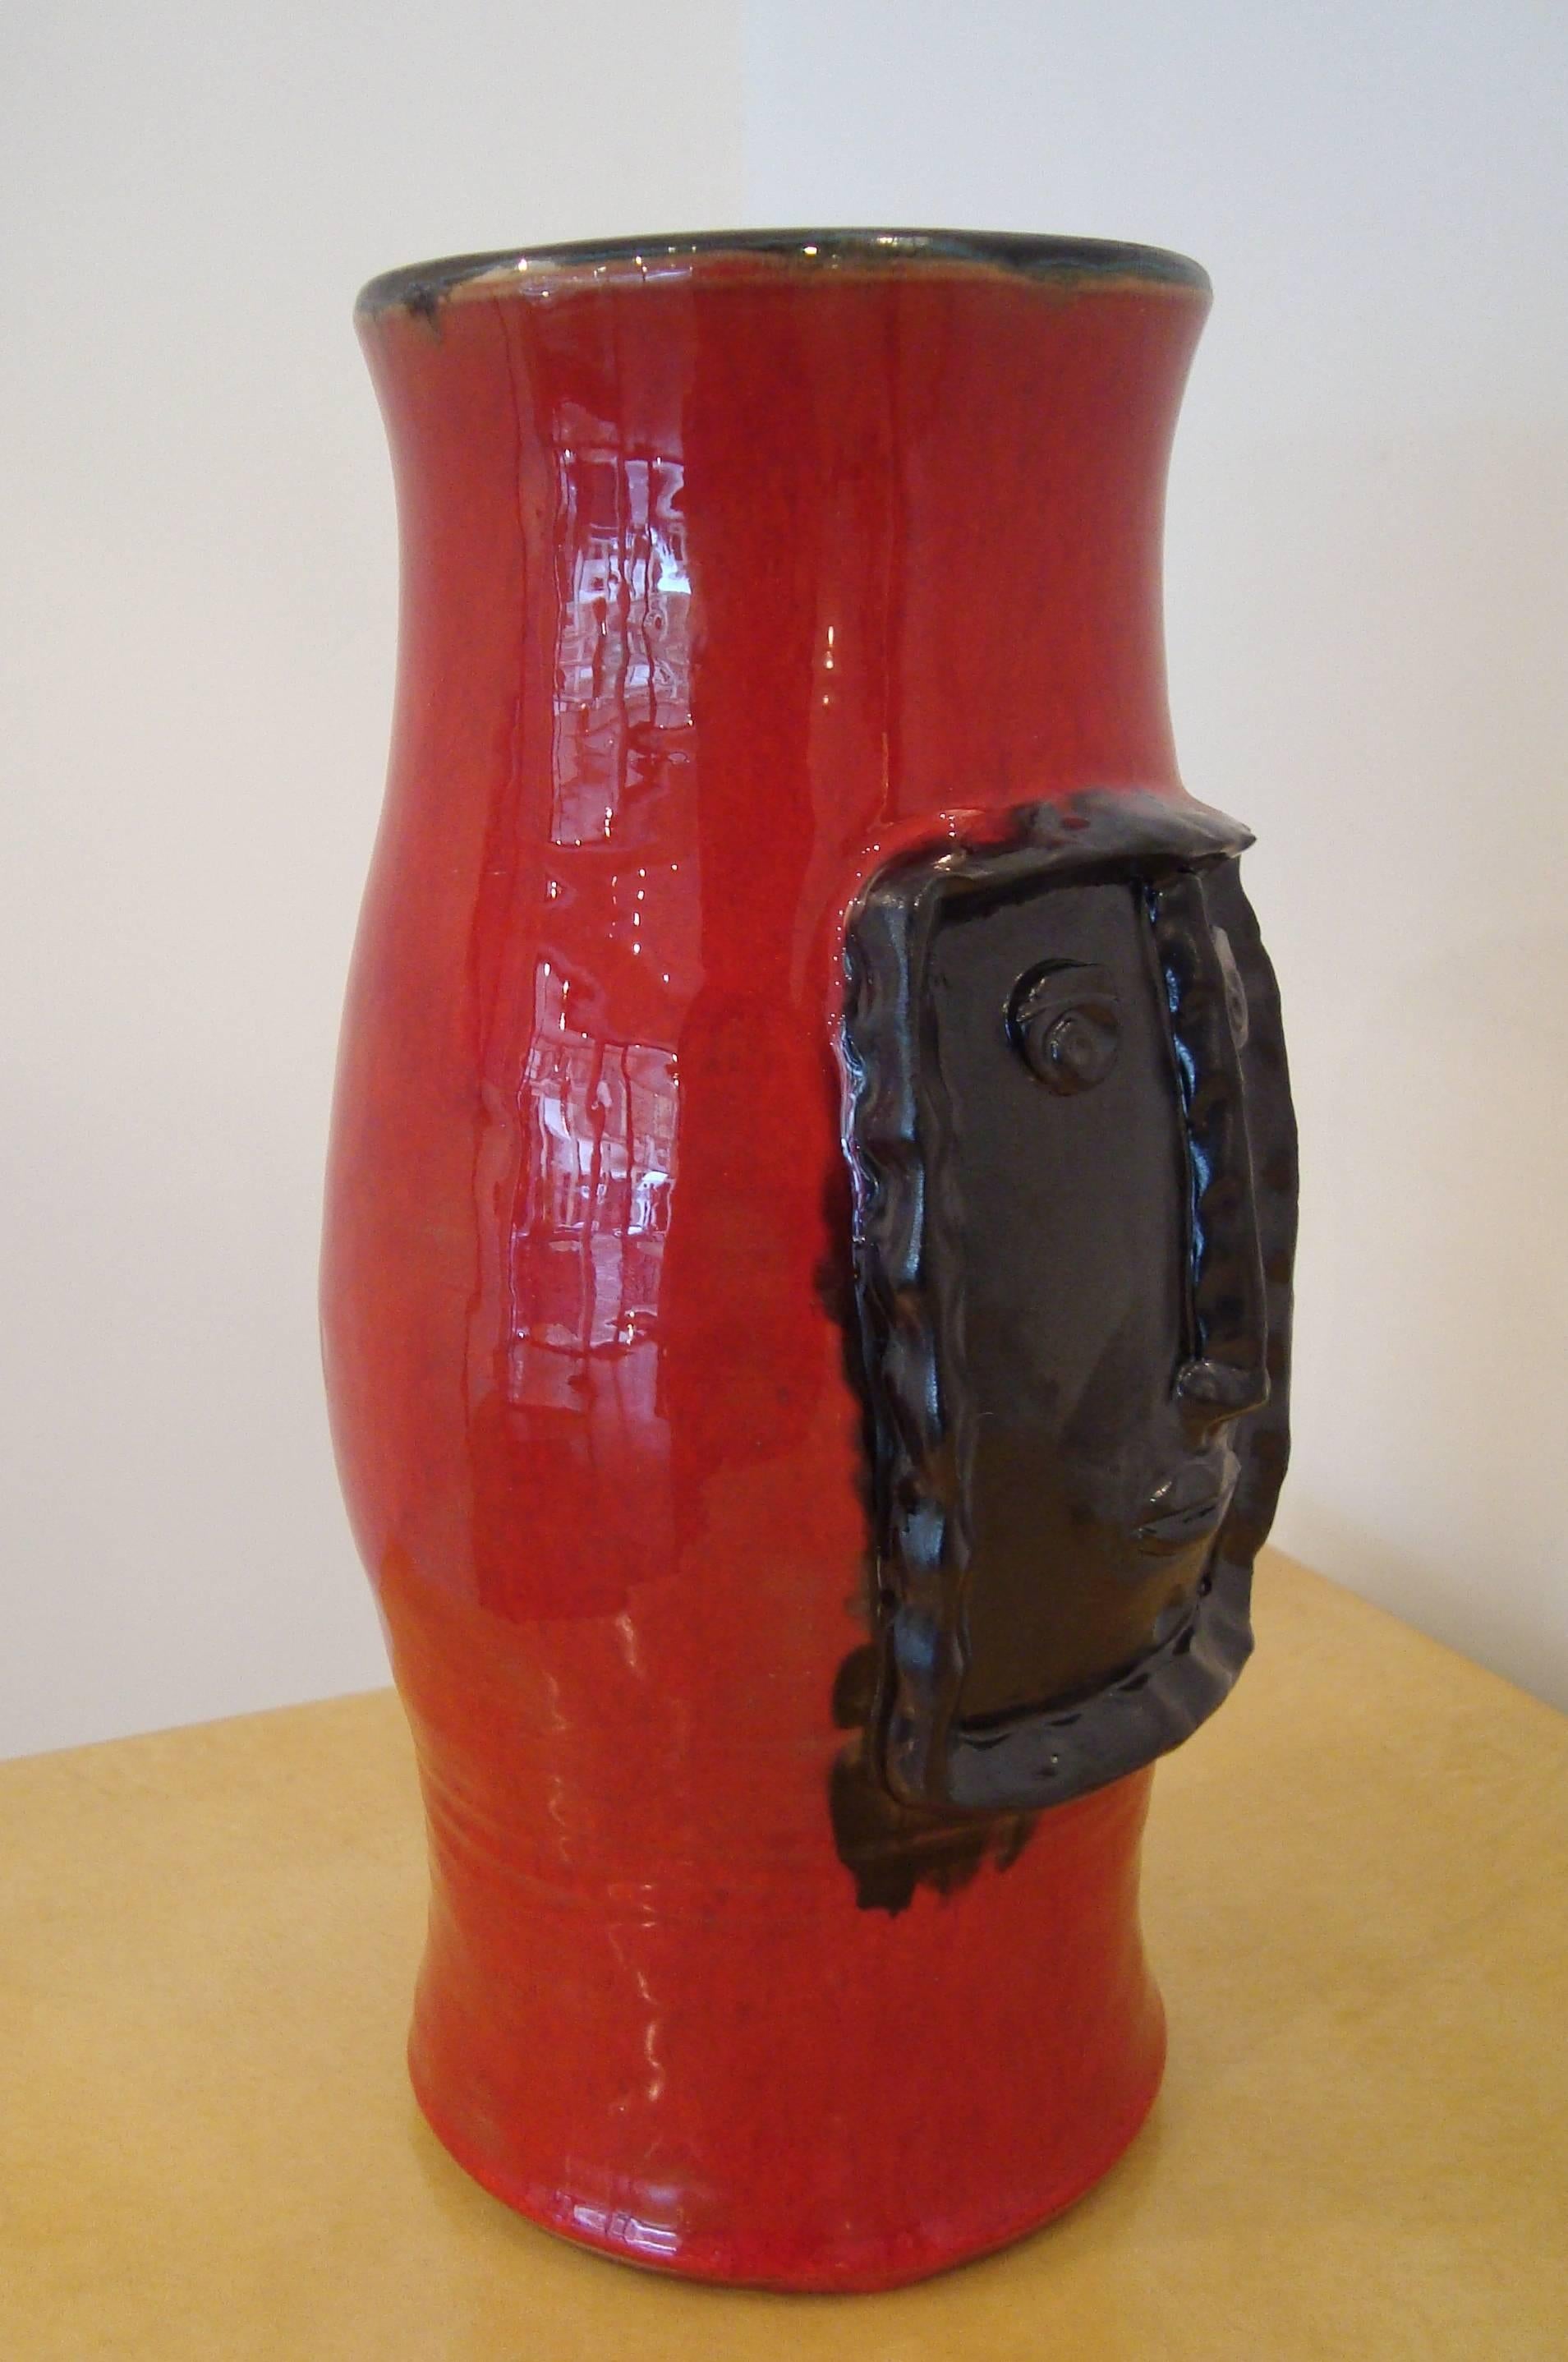 Robert et Jean Cloutier, France (1930-)/(1930-2008.)
Red vase with black relief framed head.
Red enamelled earthenware with mate black.
Signed Cloutier RJ. 
Réf : P.Favardin Les Cloutier, Paris, 2014.

